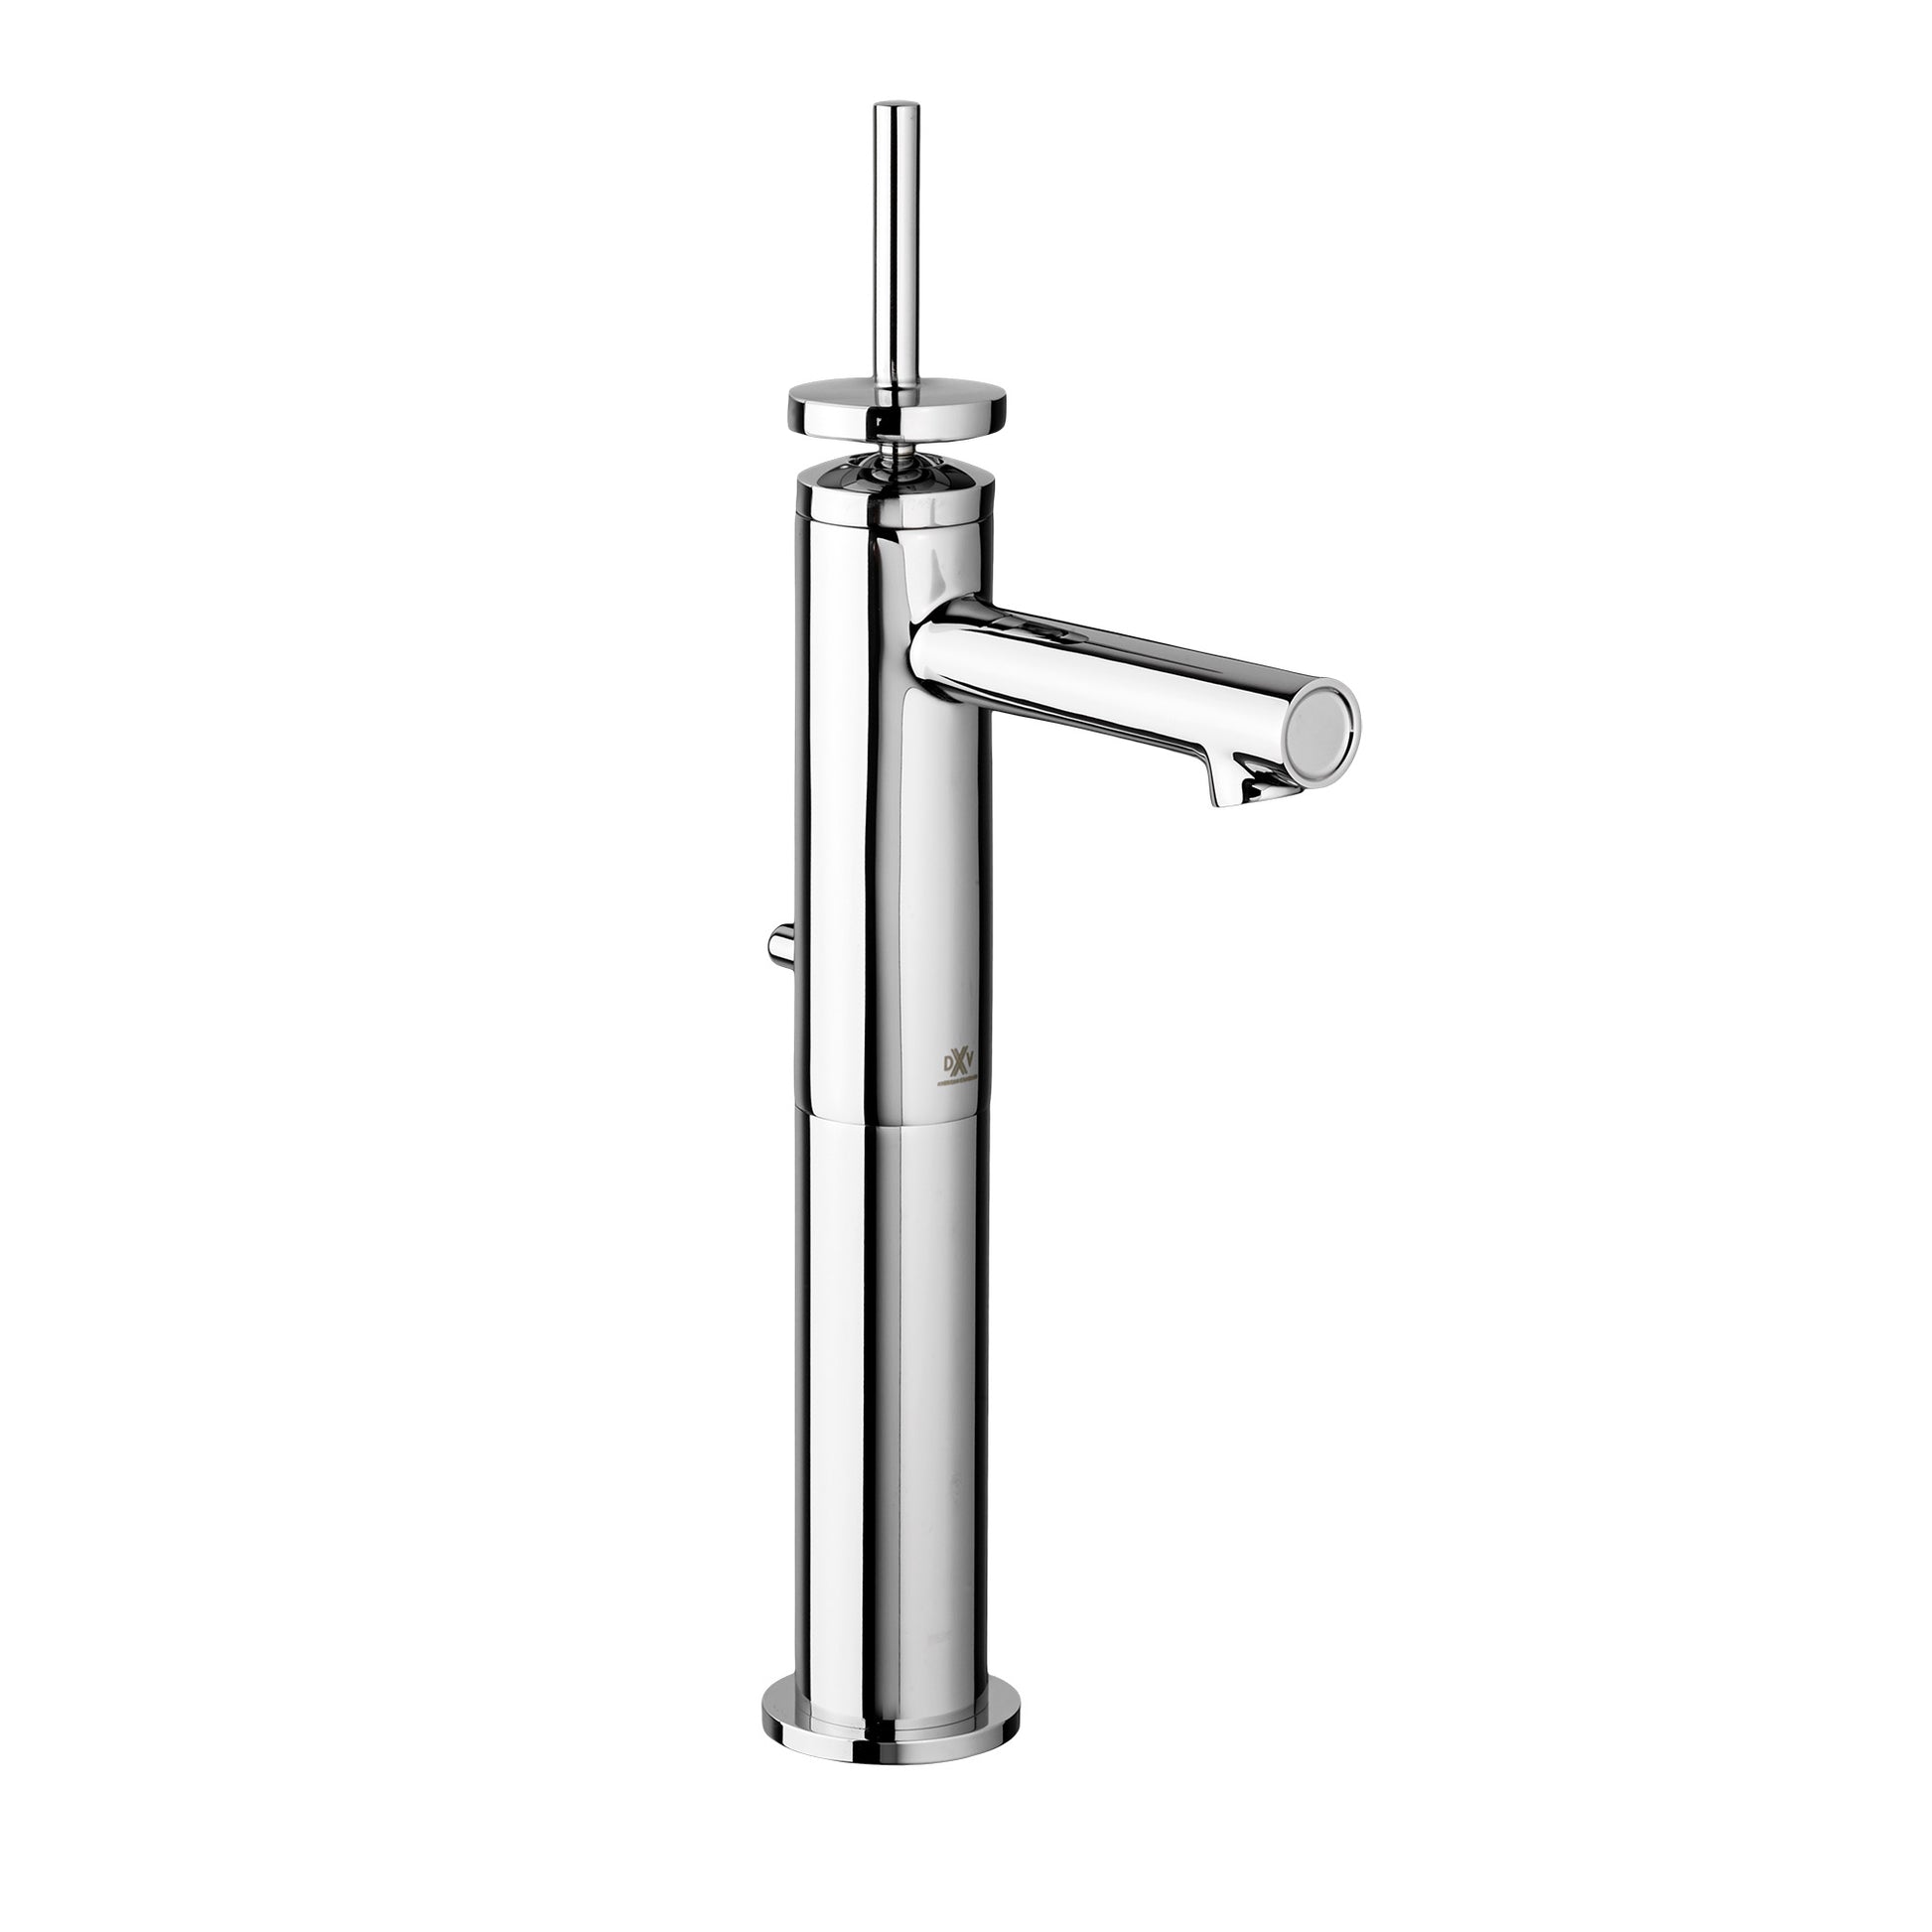 PERCY SINGLE HANDLE VESSEL BATHROOM FAUCET WITH STEM HANDLE AND GRID DRAIN